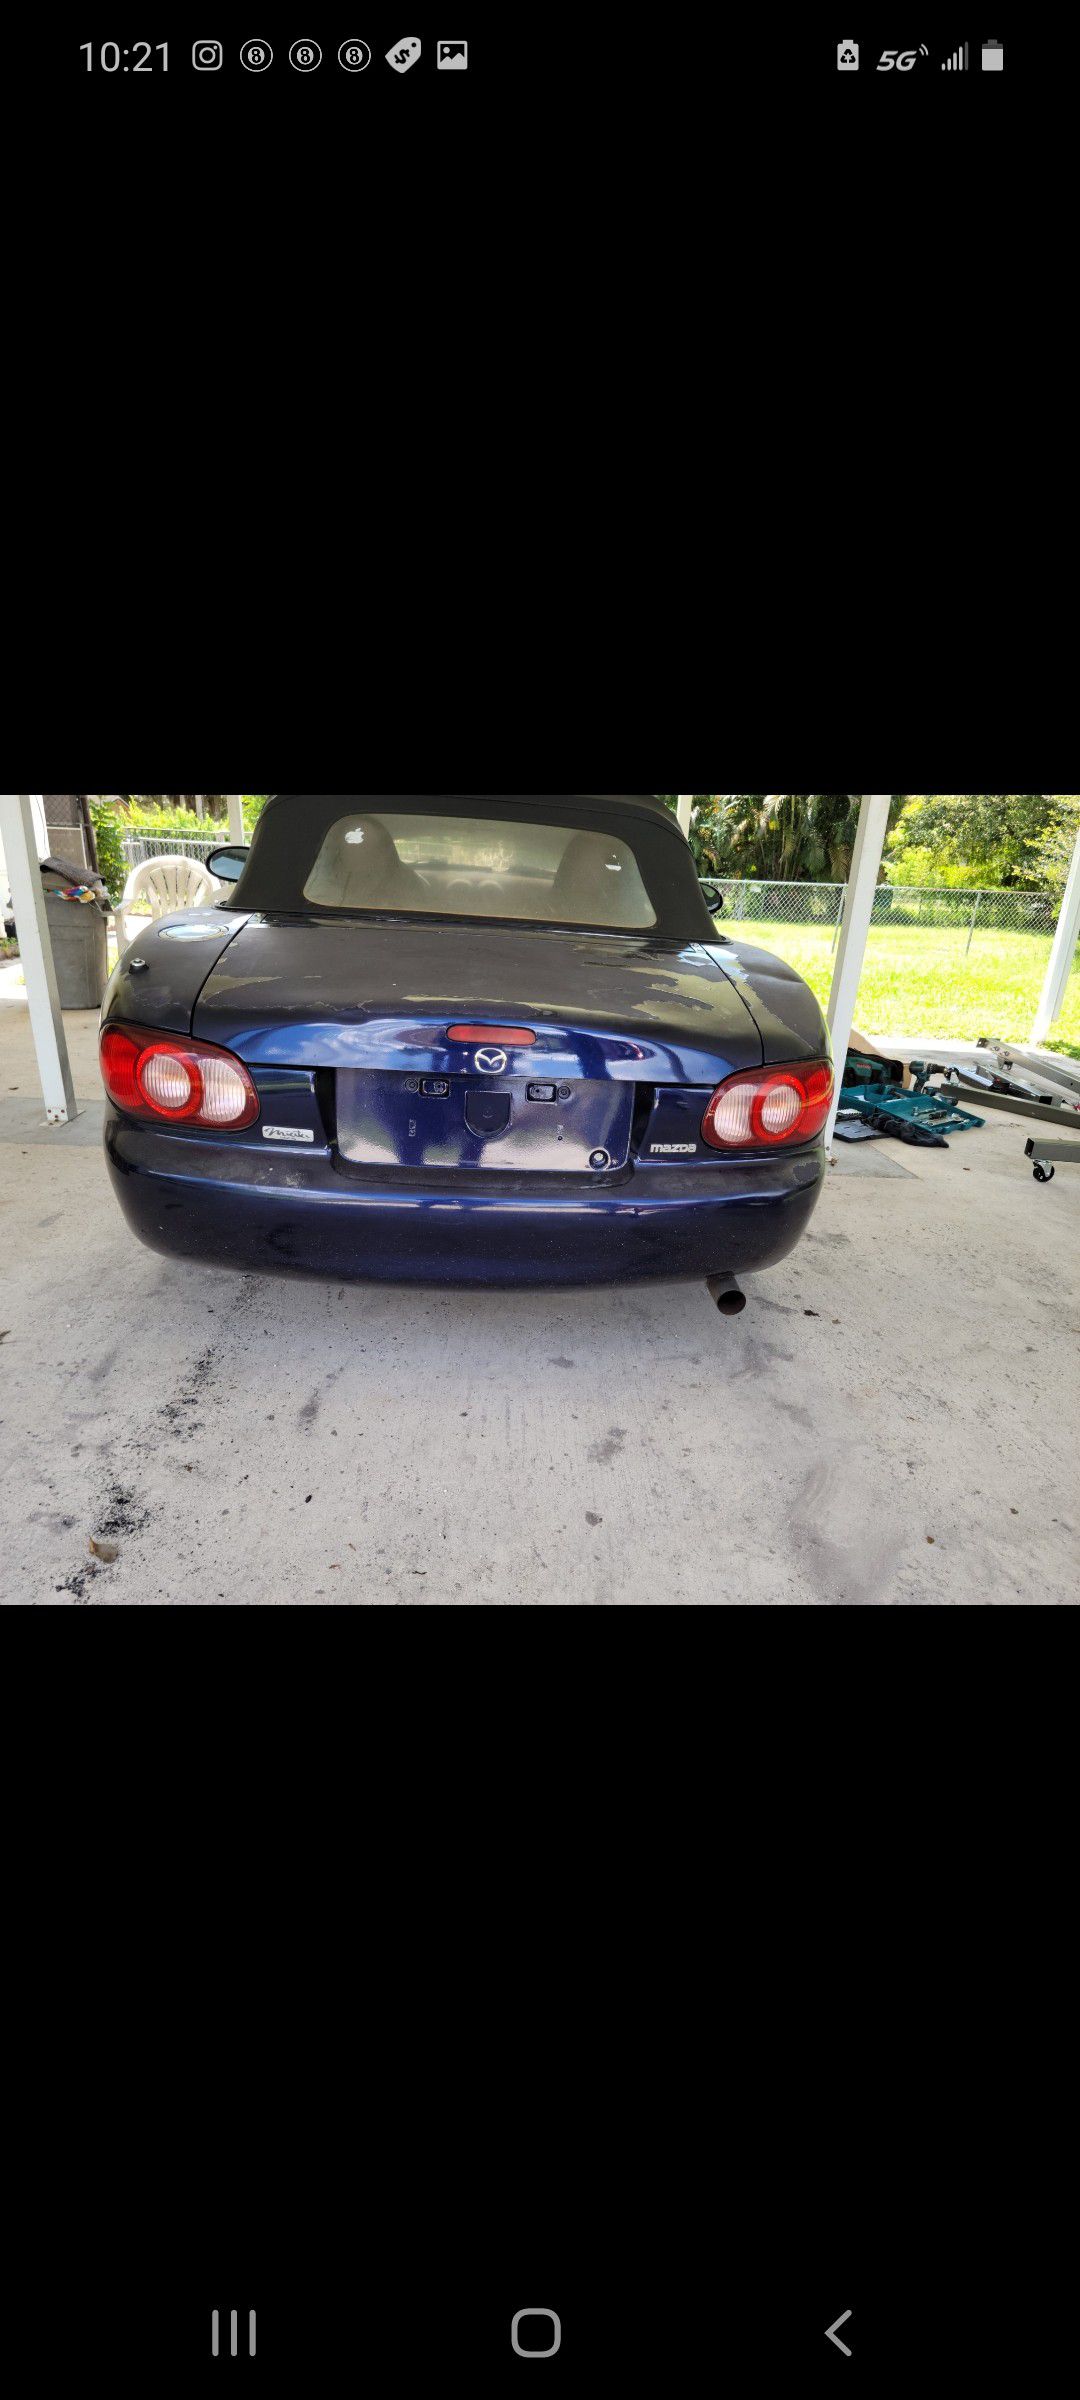 2003 Mazda miata soft top and part out. Tail lights. Trunk lid. Rear bumper. Driver side door etc